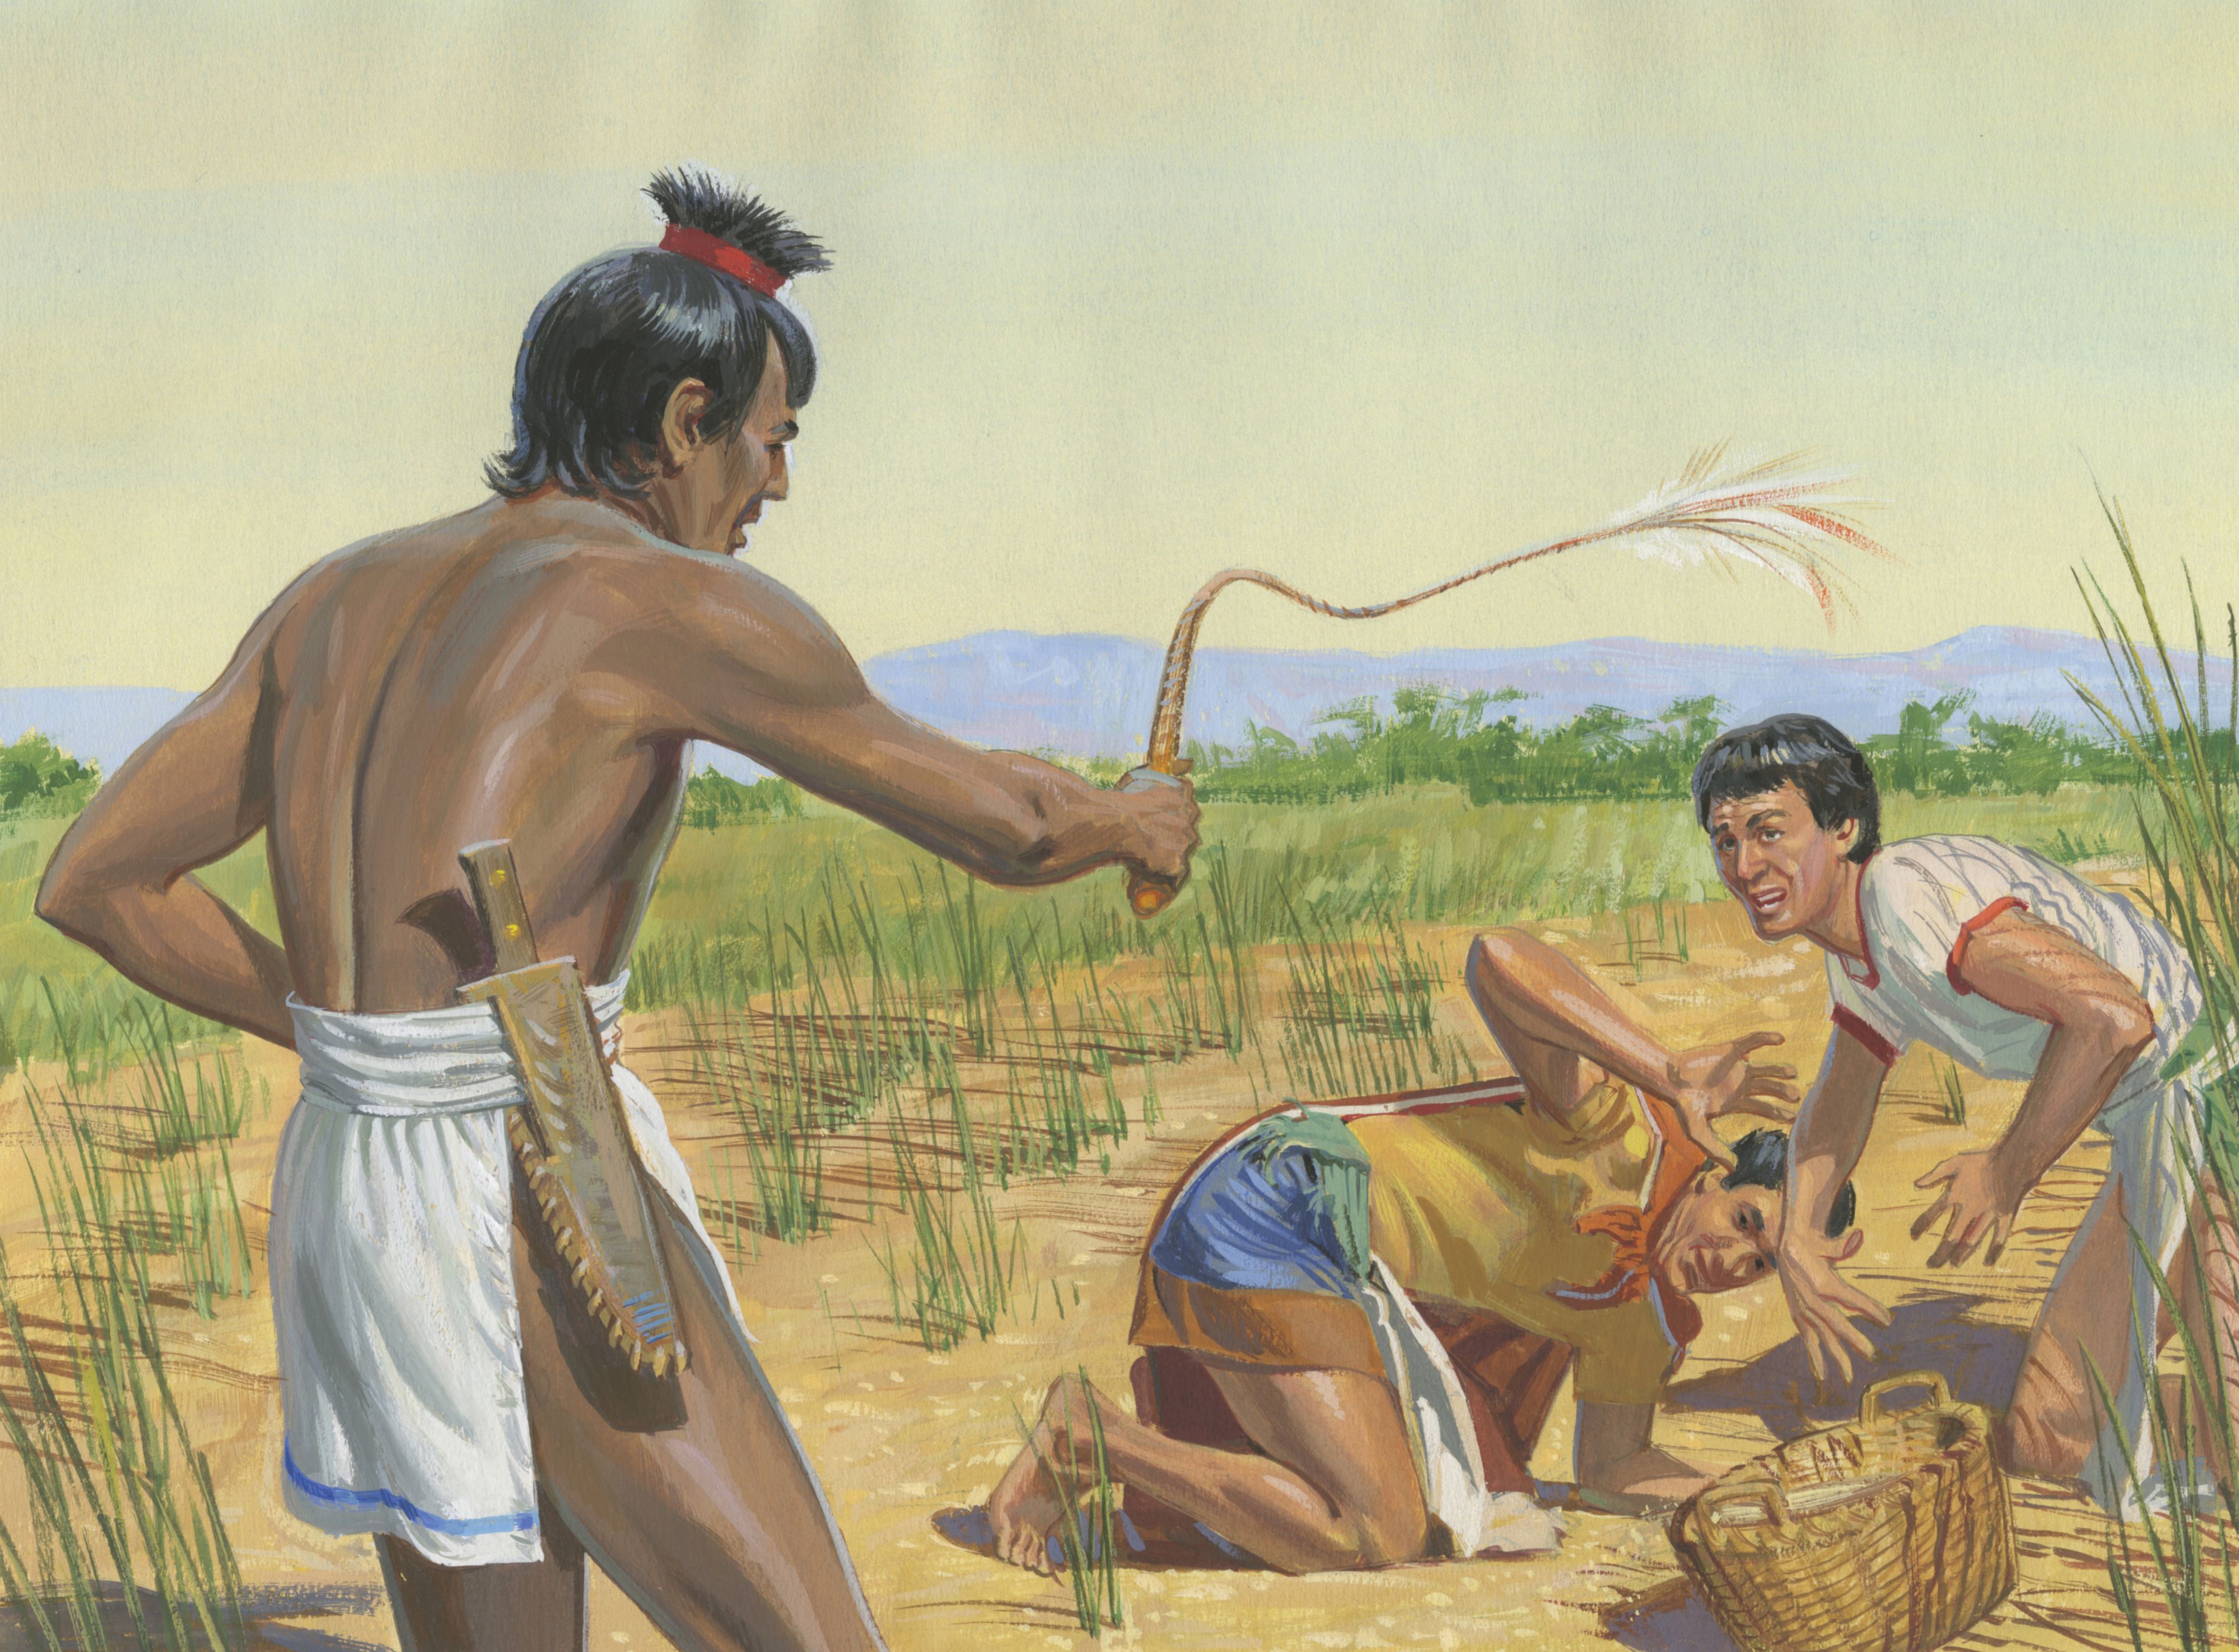 A painting by Jerry Thompson depicting the Nephites under the guard of the Lamanites; Primary manual 4-24